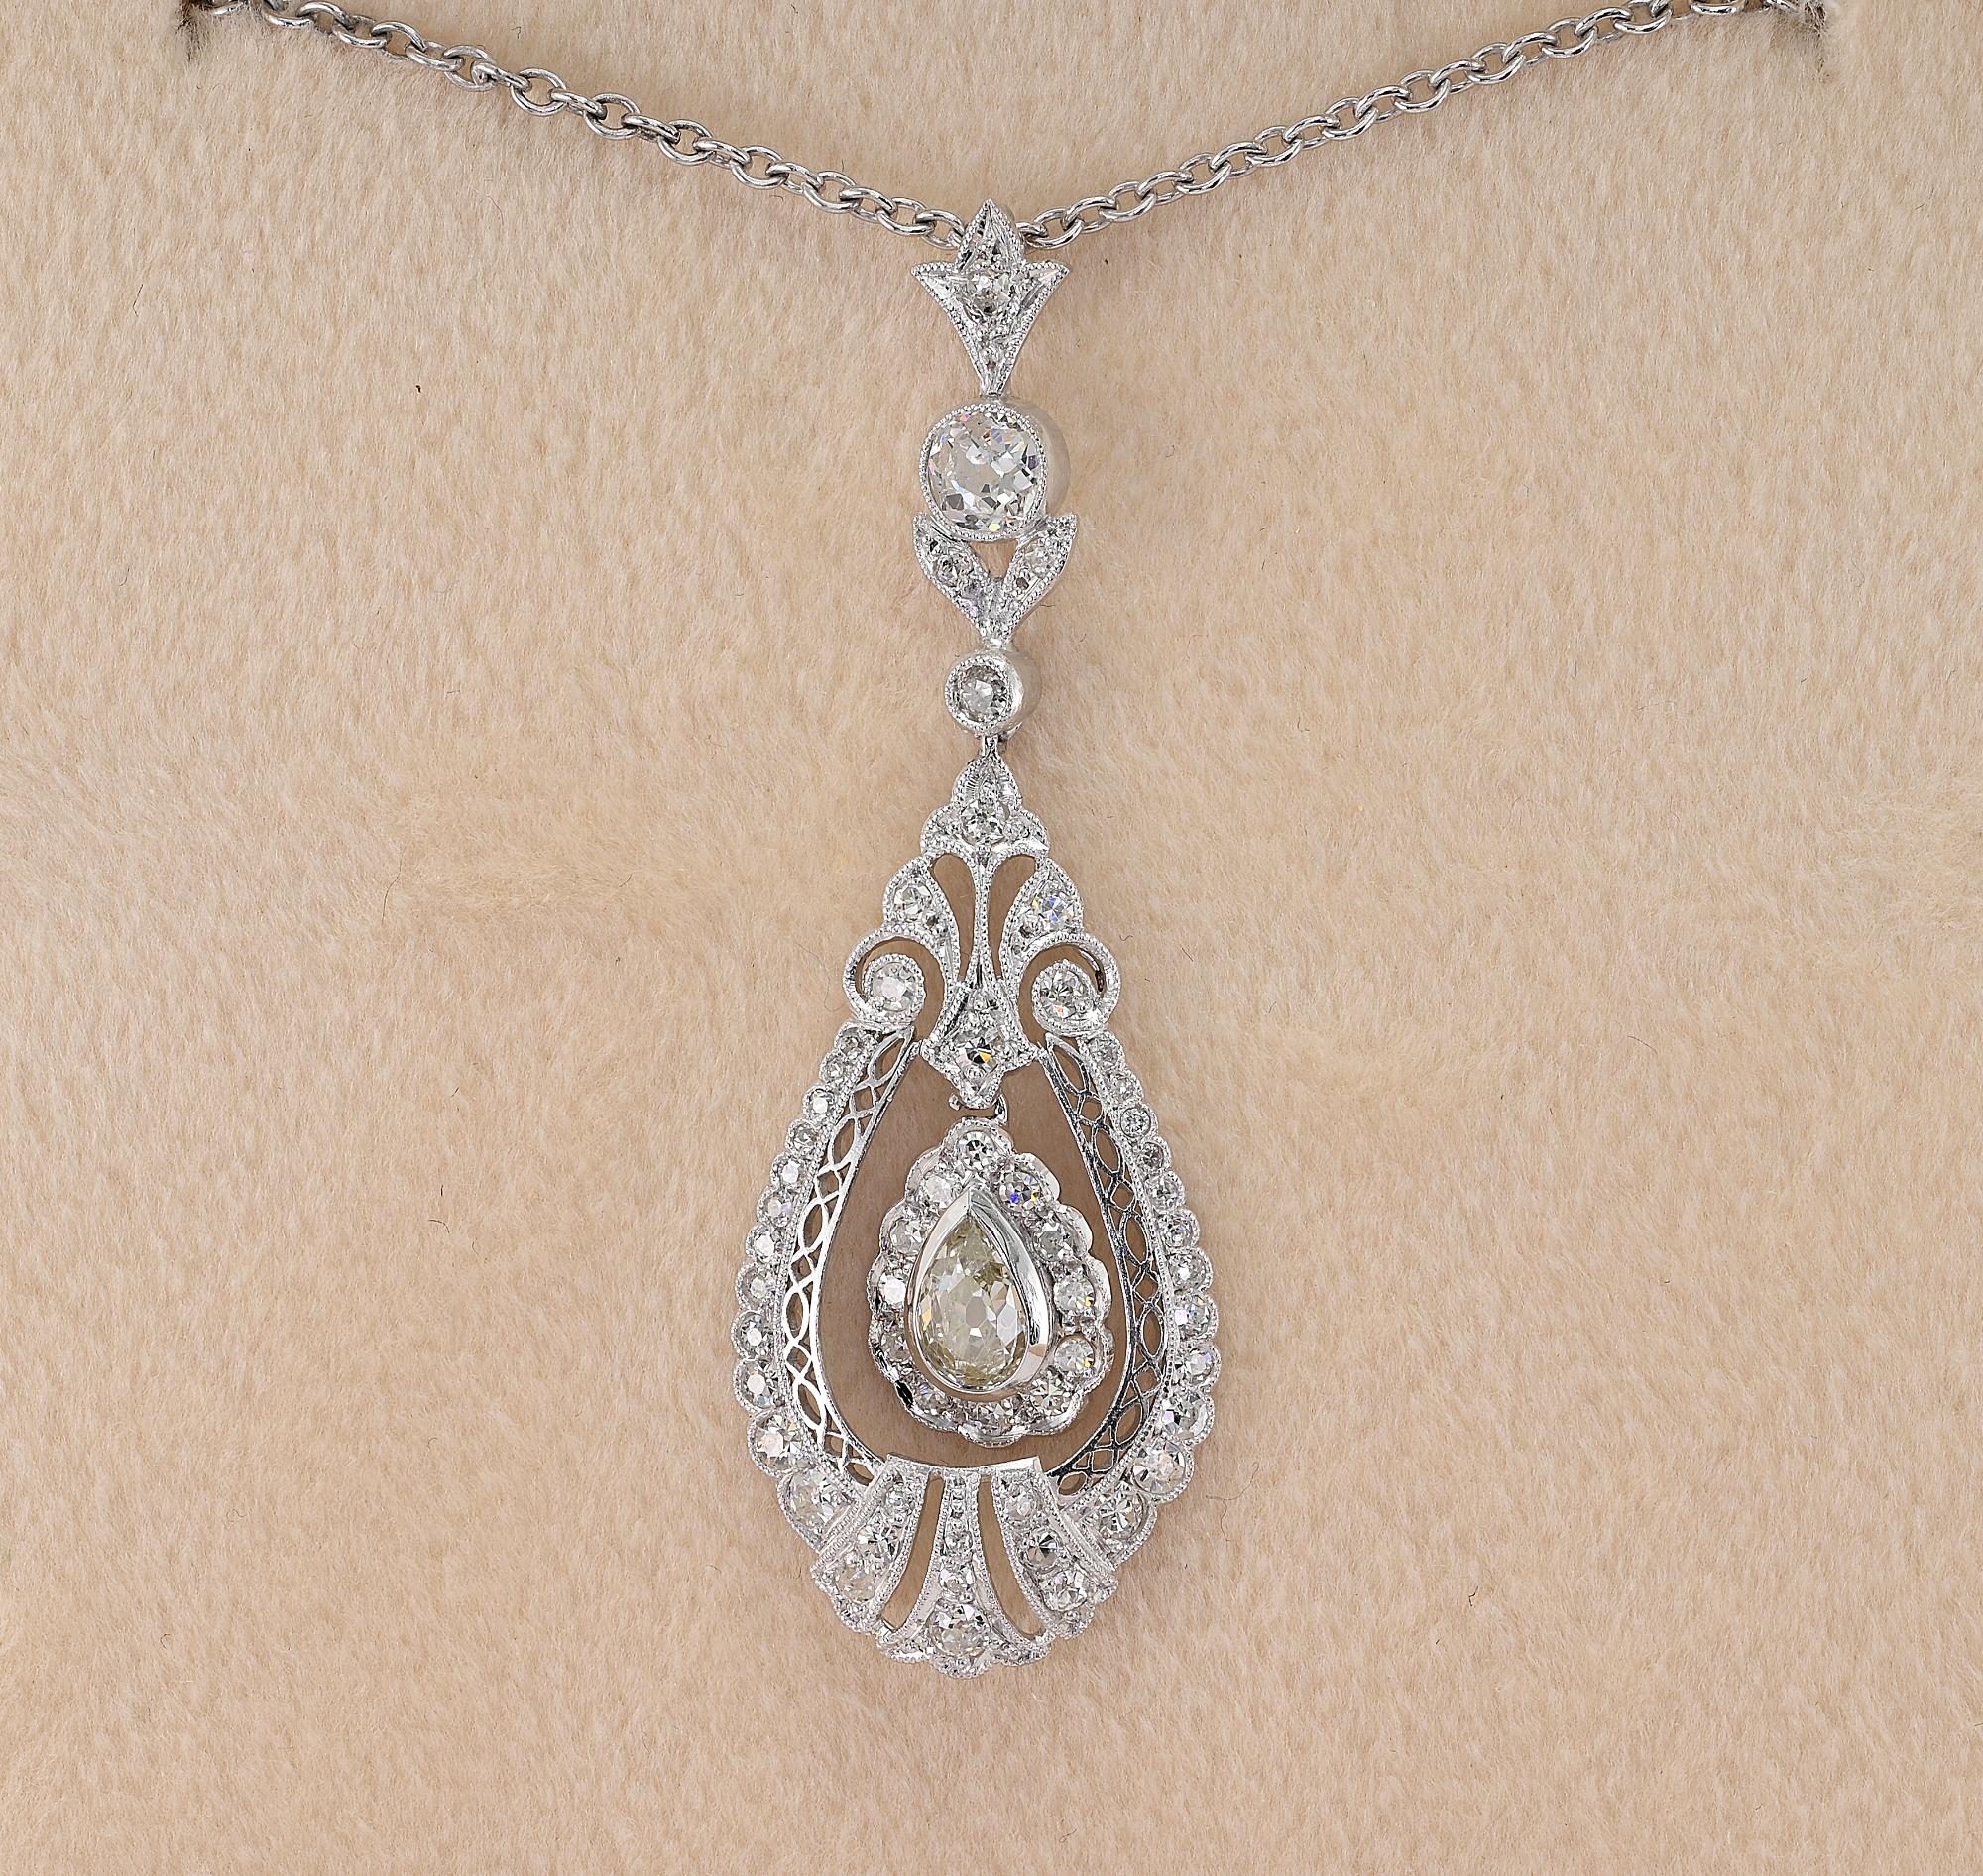 This very charming antique Edwardian period Diamond pendant is 1905 circa
Skillfully hand crafted during the time of solid 18 KT white gold
Amazing openwork design, detailed with scrolls and fretwork making it quite a one off
Diamond set has two